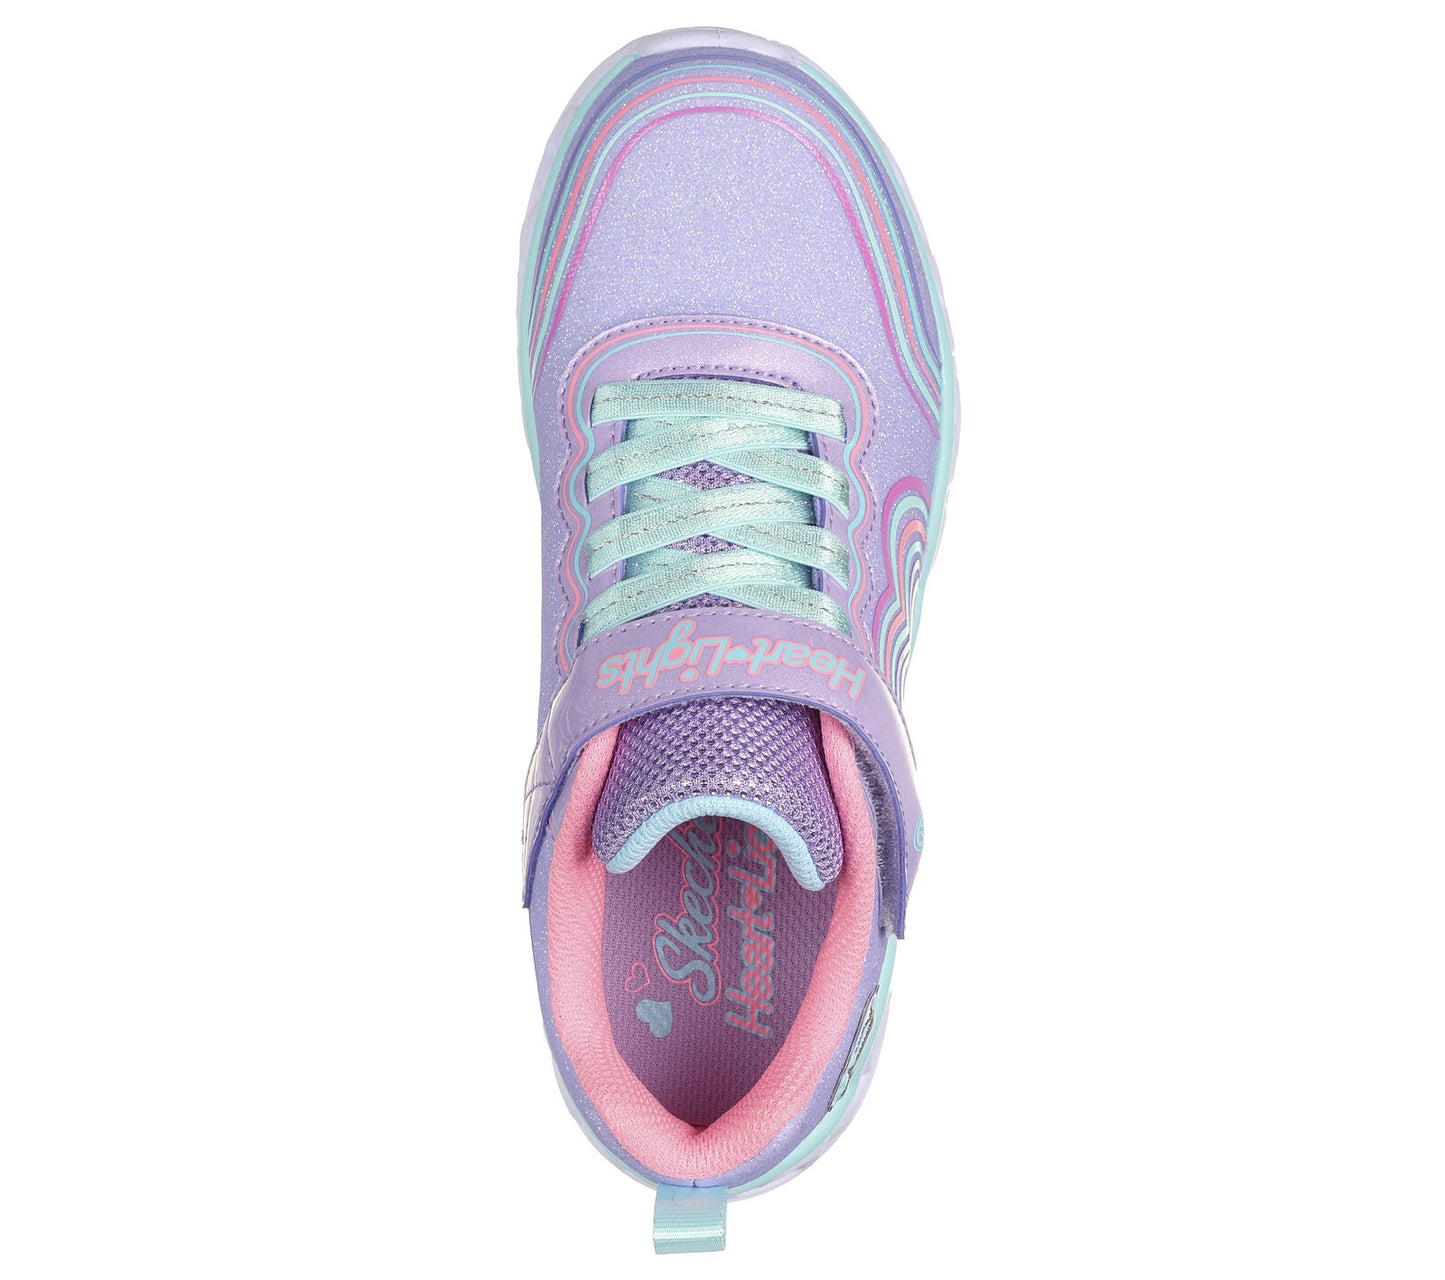 Skechers  S Lights Retro Hearts in lavender with a multi coloured swirl pattern round the upper. Lights along the  heart sole unit and the Skechers branding. Velcro fastening with flat stretch bungee laces. Top view.